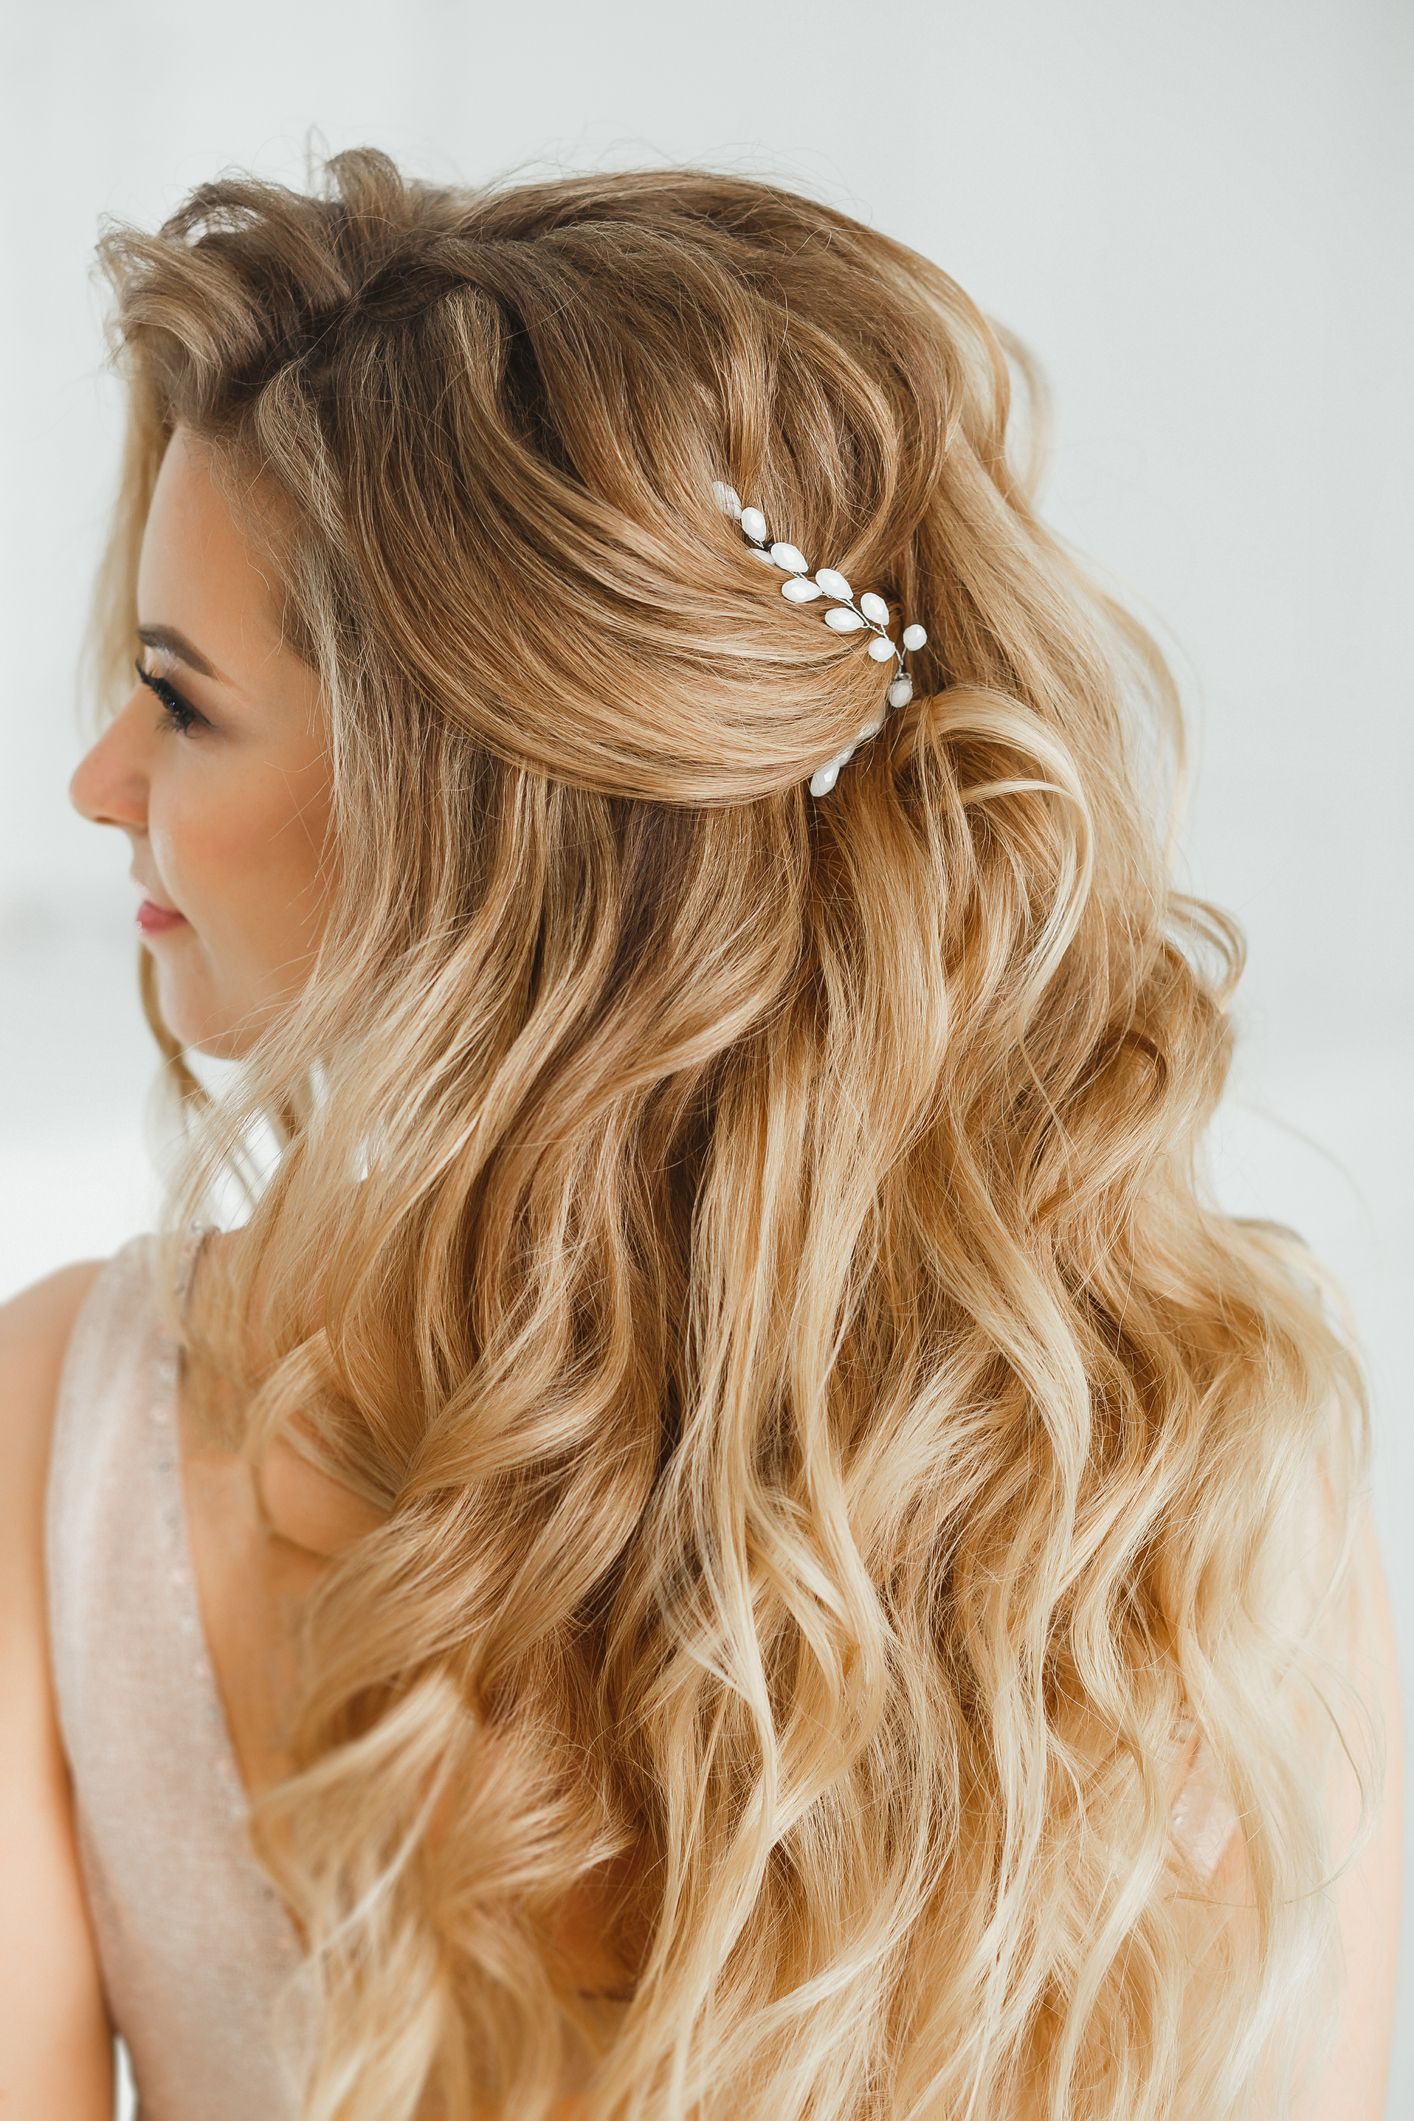 33 Country Wedding Hairstyles You'll Want to Screenshot Immediately